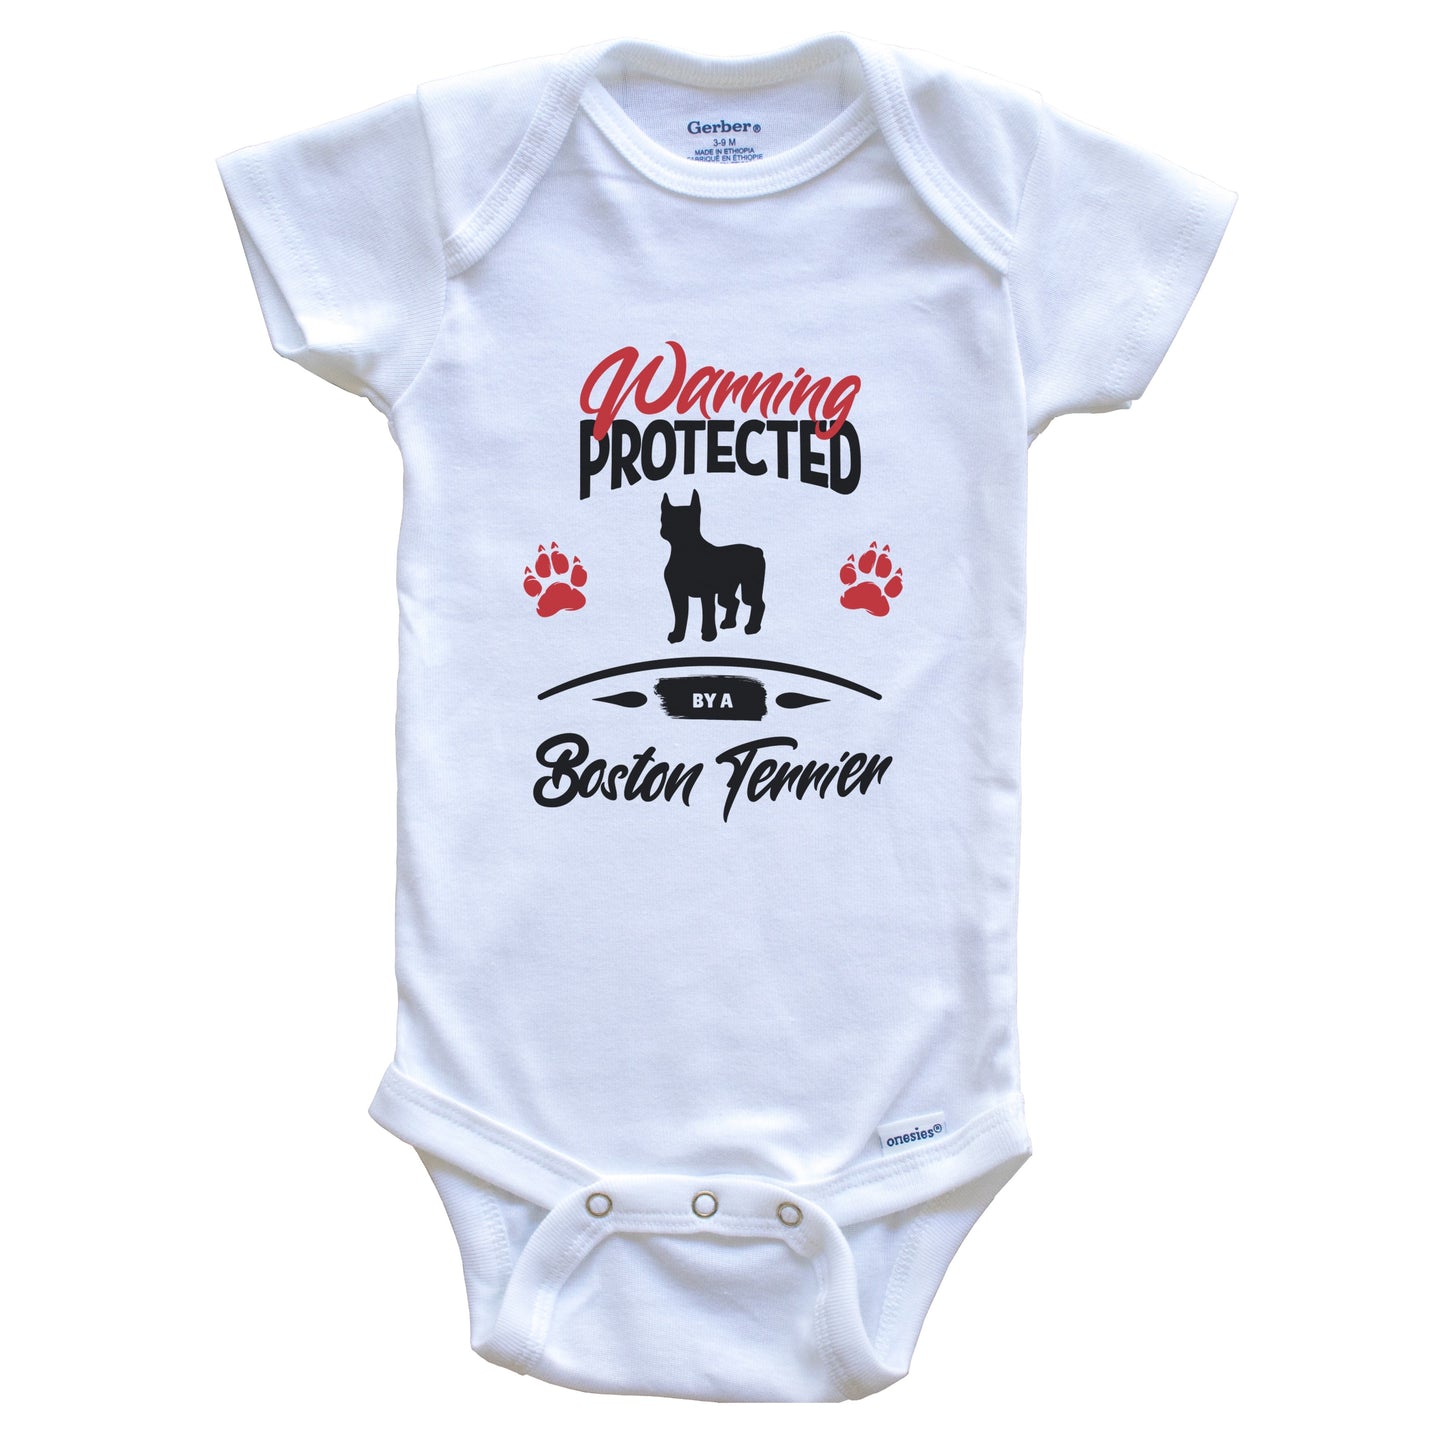 Warning Protected By A Boston Terrier Funny Dog Owner Baby Bodysuit